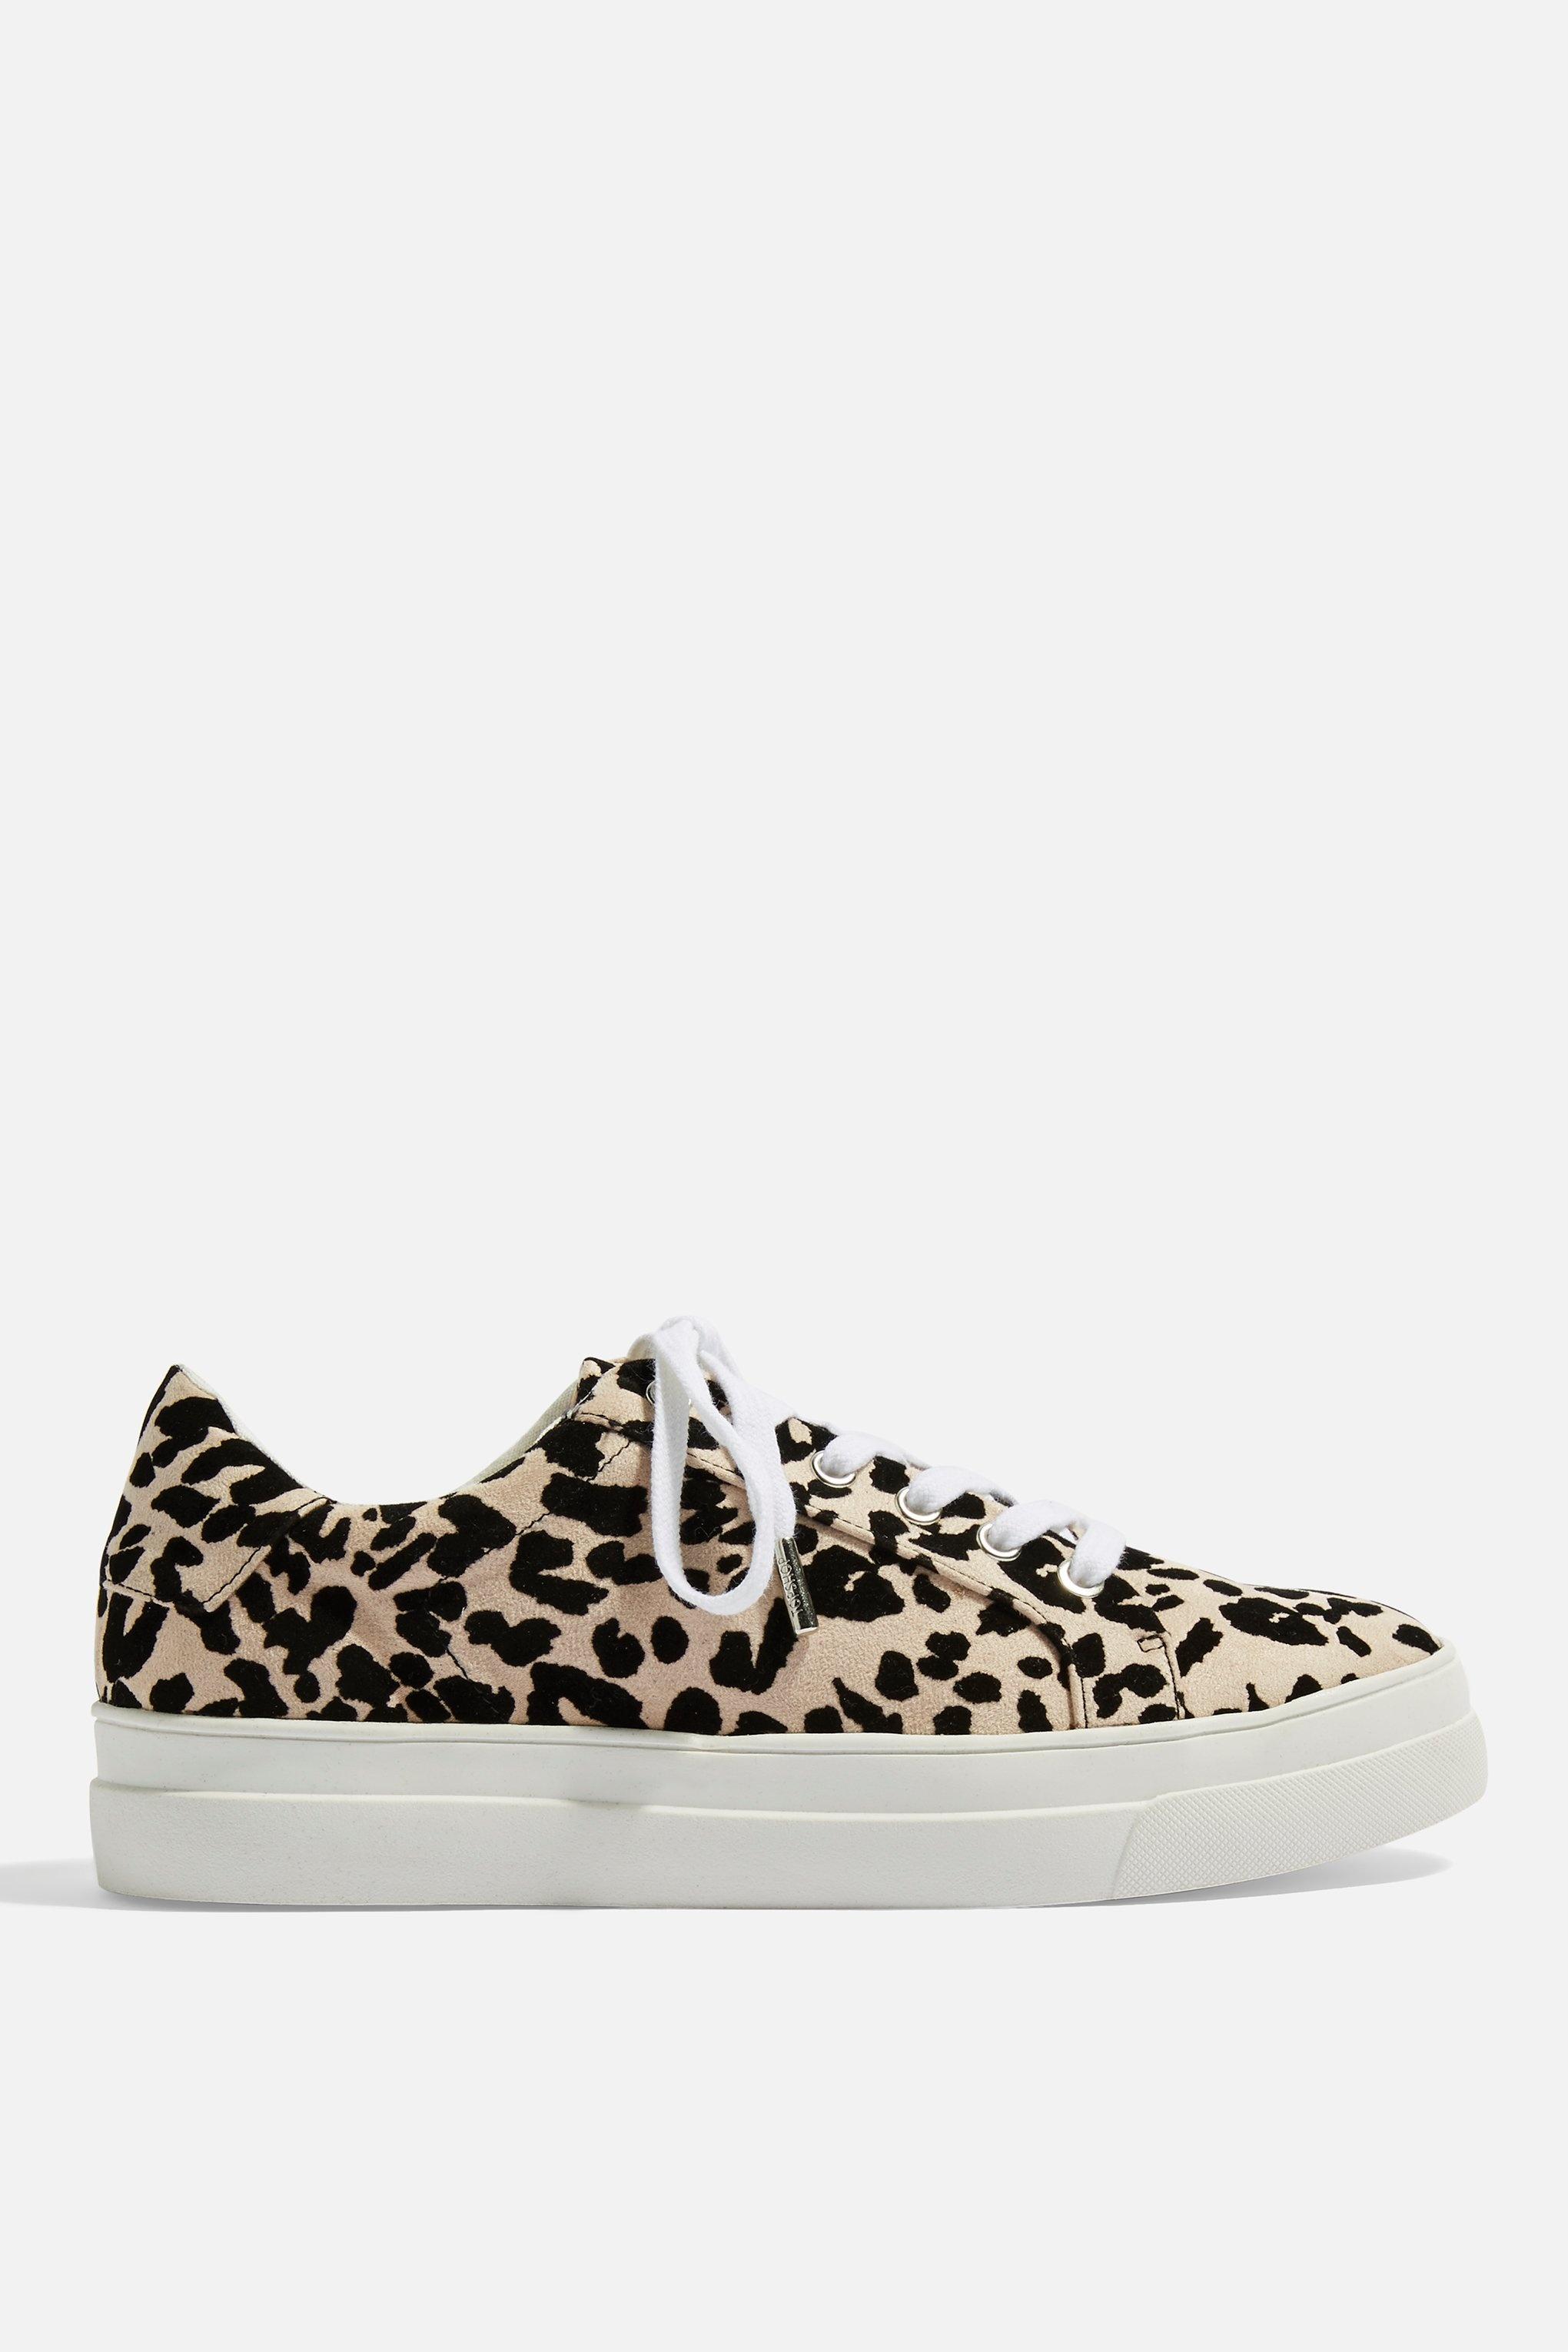 topshop candy lace up trainers